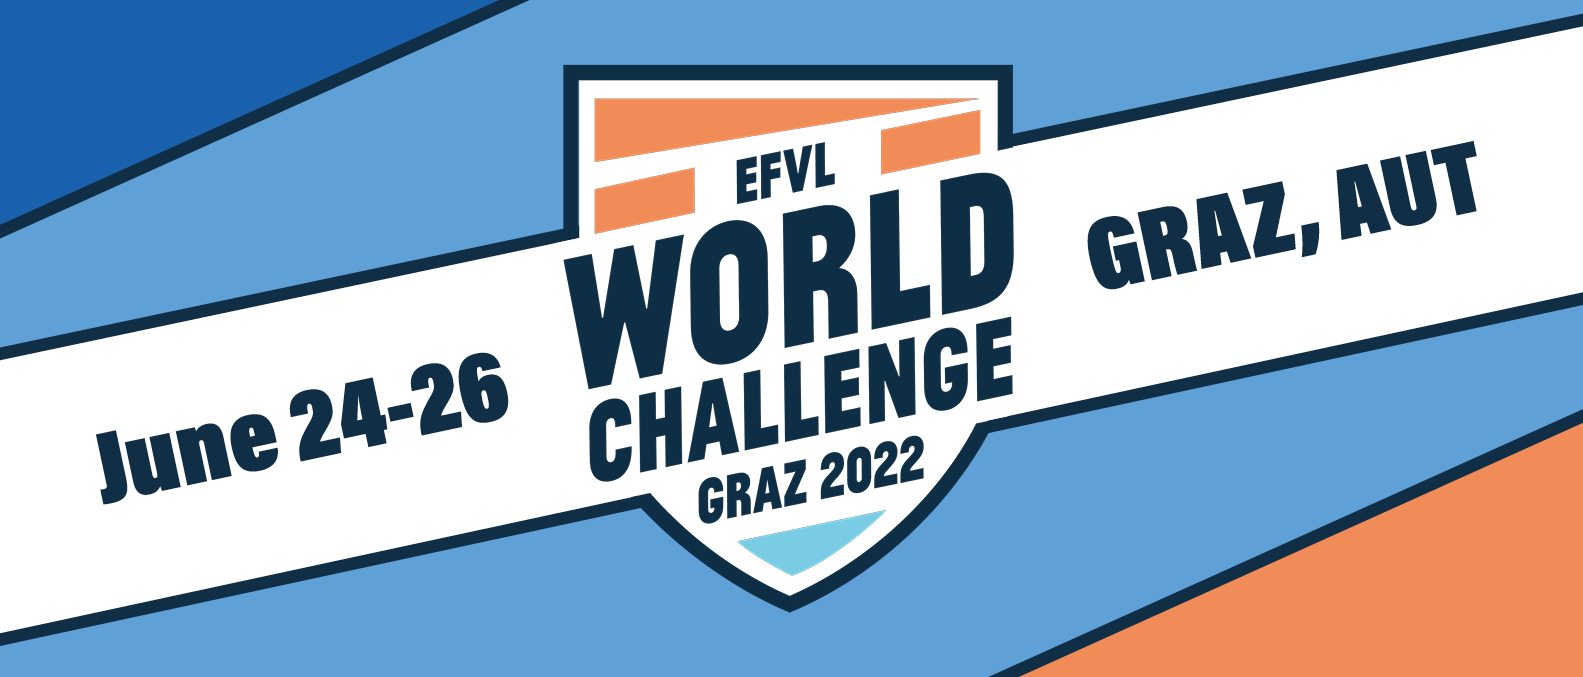 Only two more months until the EFVL World Challenge